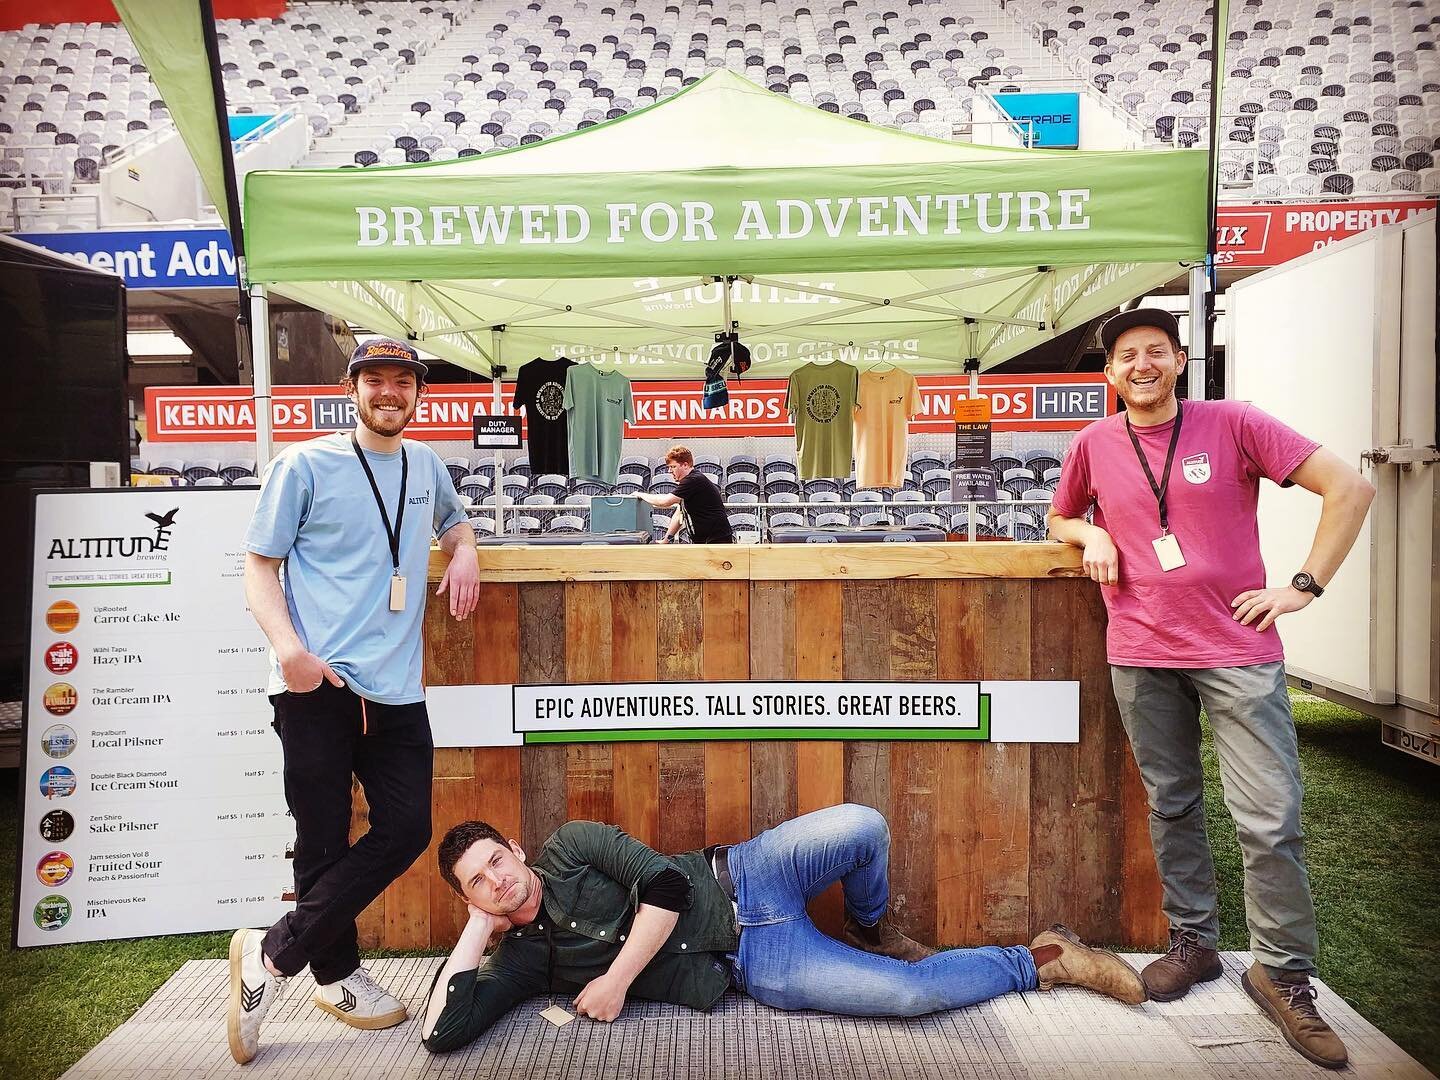 This is what you see when you look up thirst-trap in the encyclopaedia.
.
.
.
#altitudebrewing #dcbff #thirst #queenstownbrewers #whakatipu #craftbeer #beerfest #dunedin #thirst-trap #menatwork